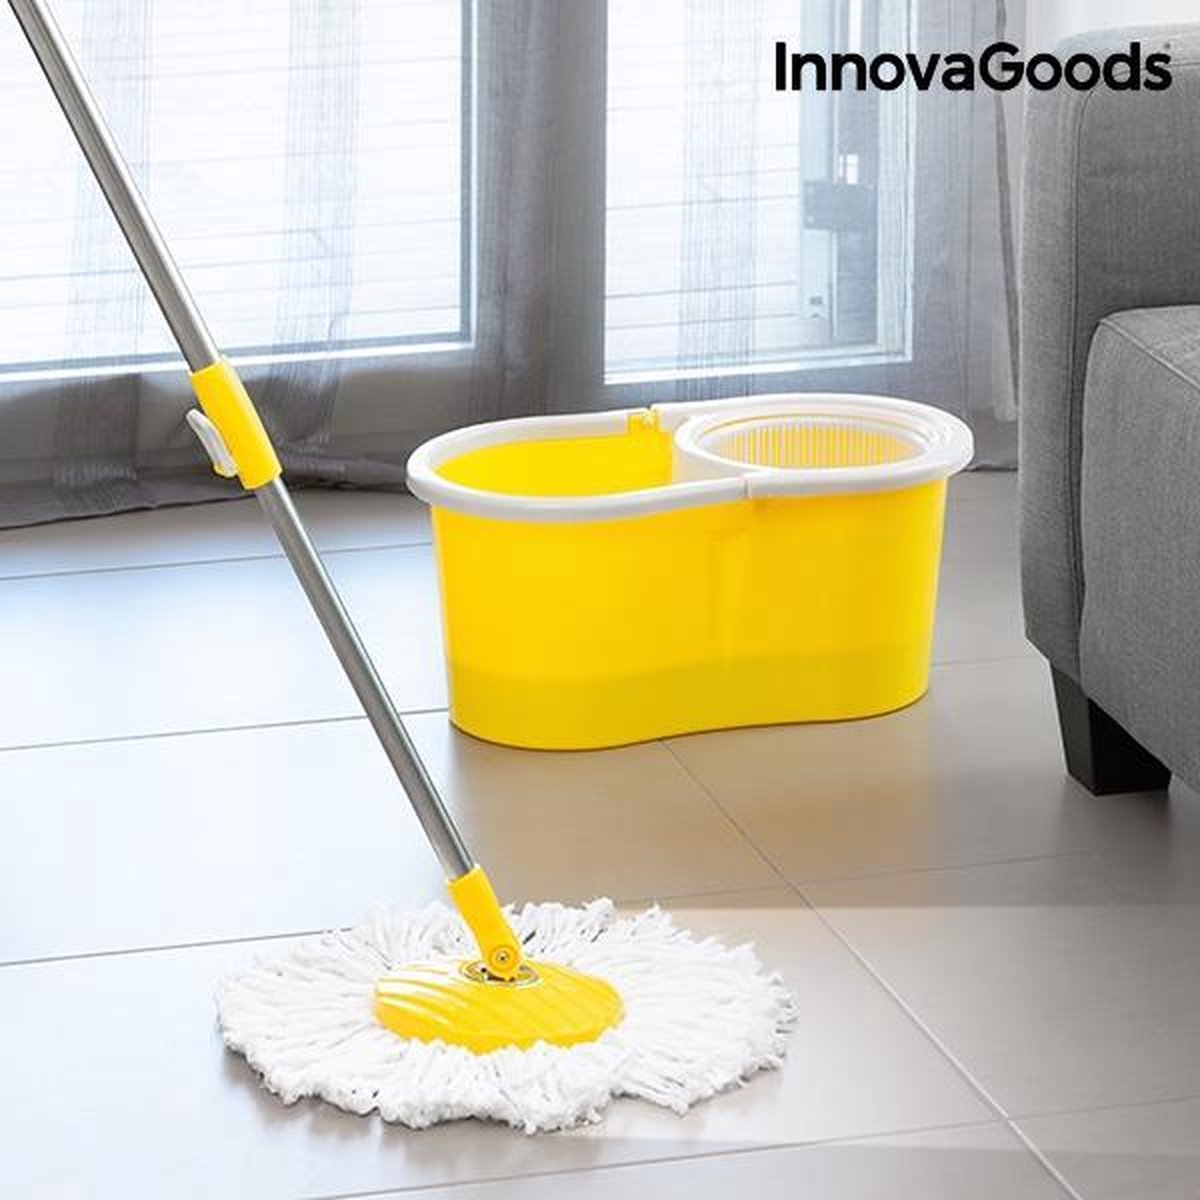 InnovaGoods Double Action Rotating Mop with Bucket | bol.com